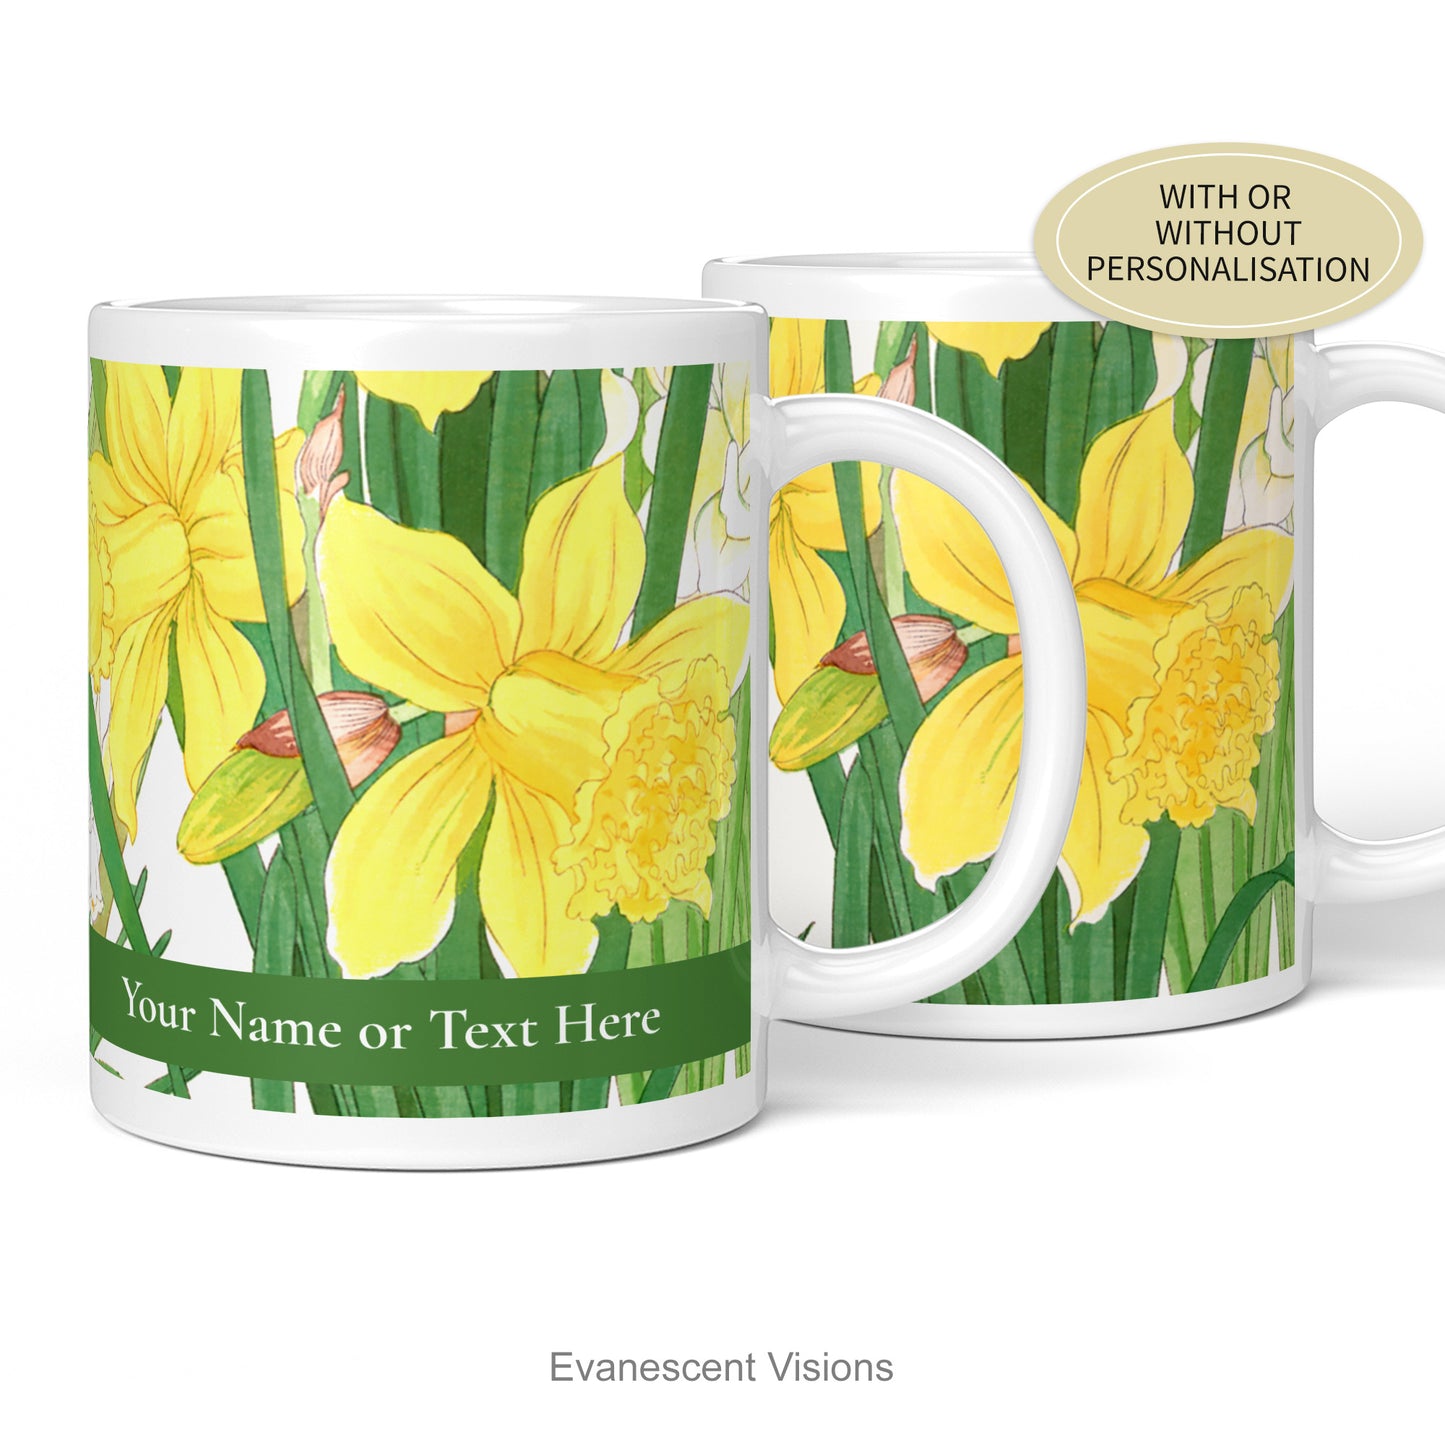 Mug shown with and without personalisation. Design from a woodblock painting of Spring Daffodil Flowers by artist Kônan Tanigami (1917-1924)